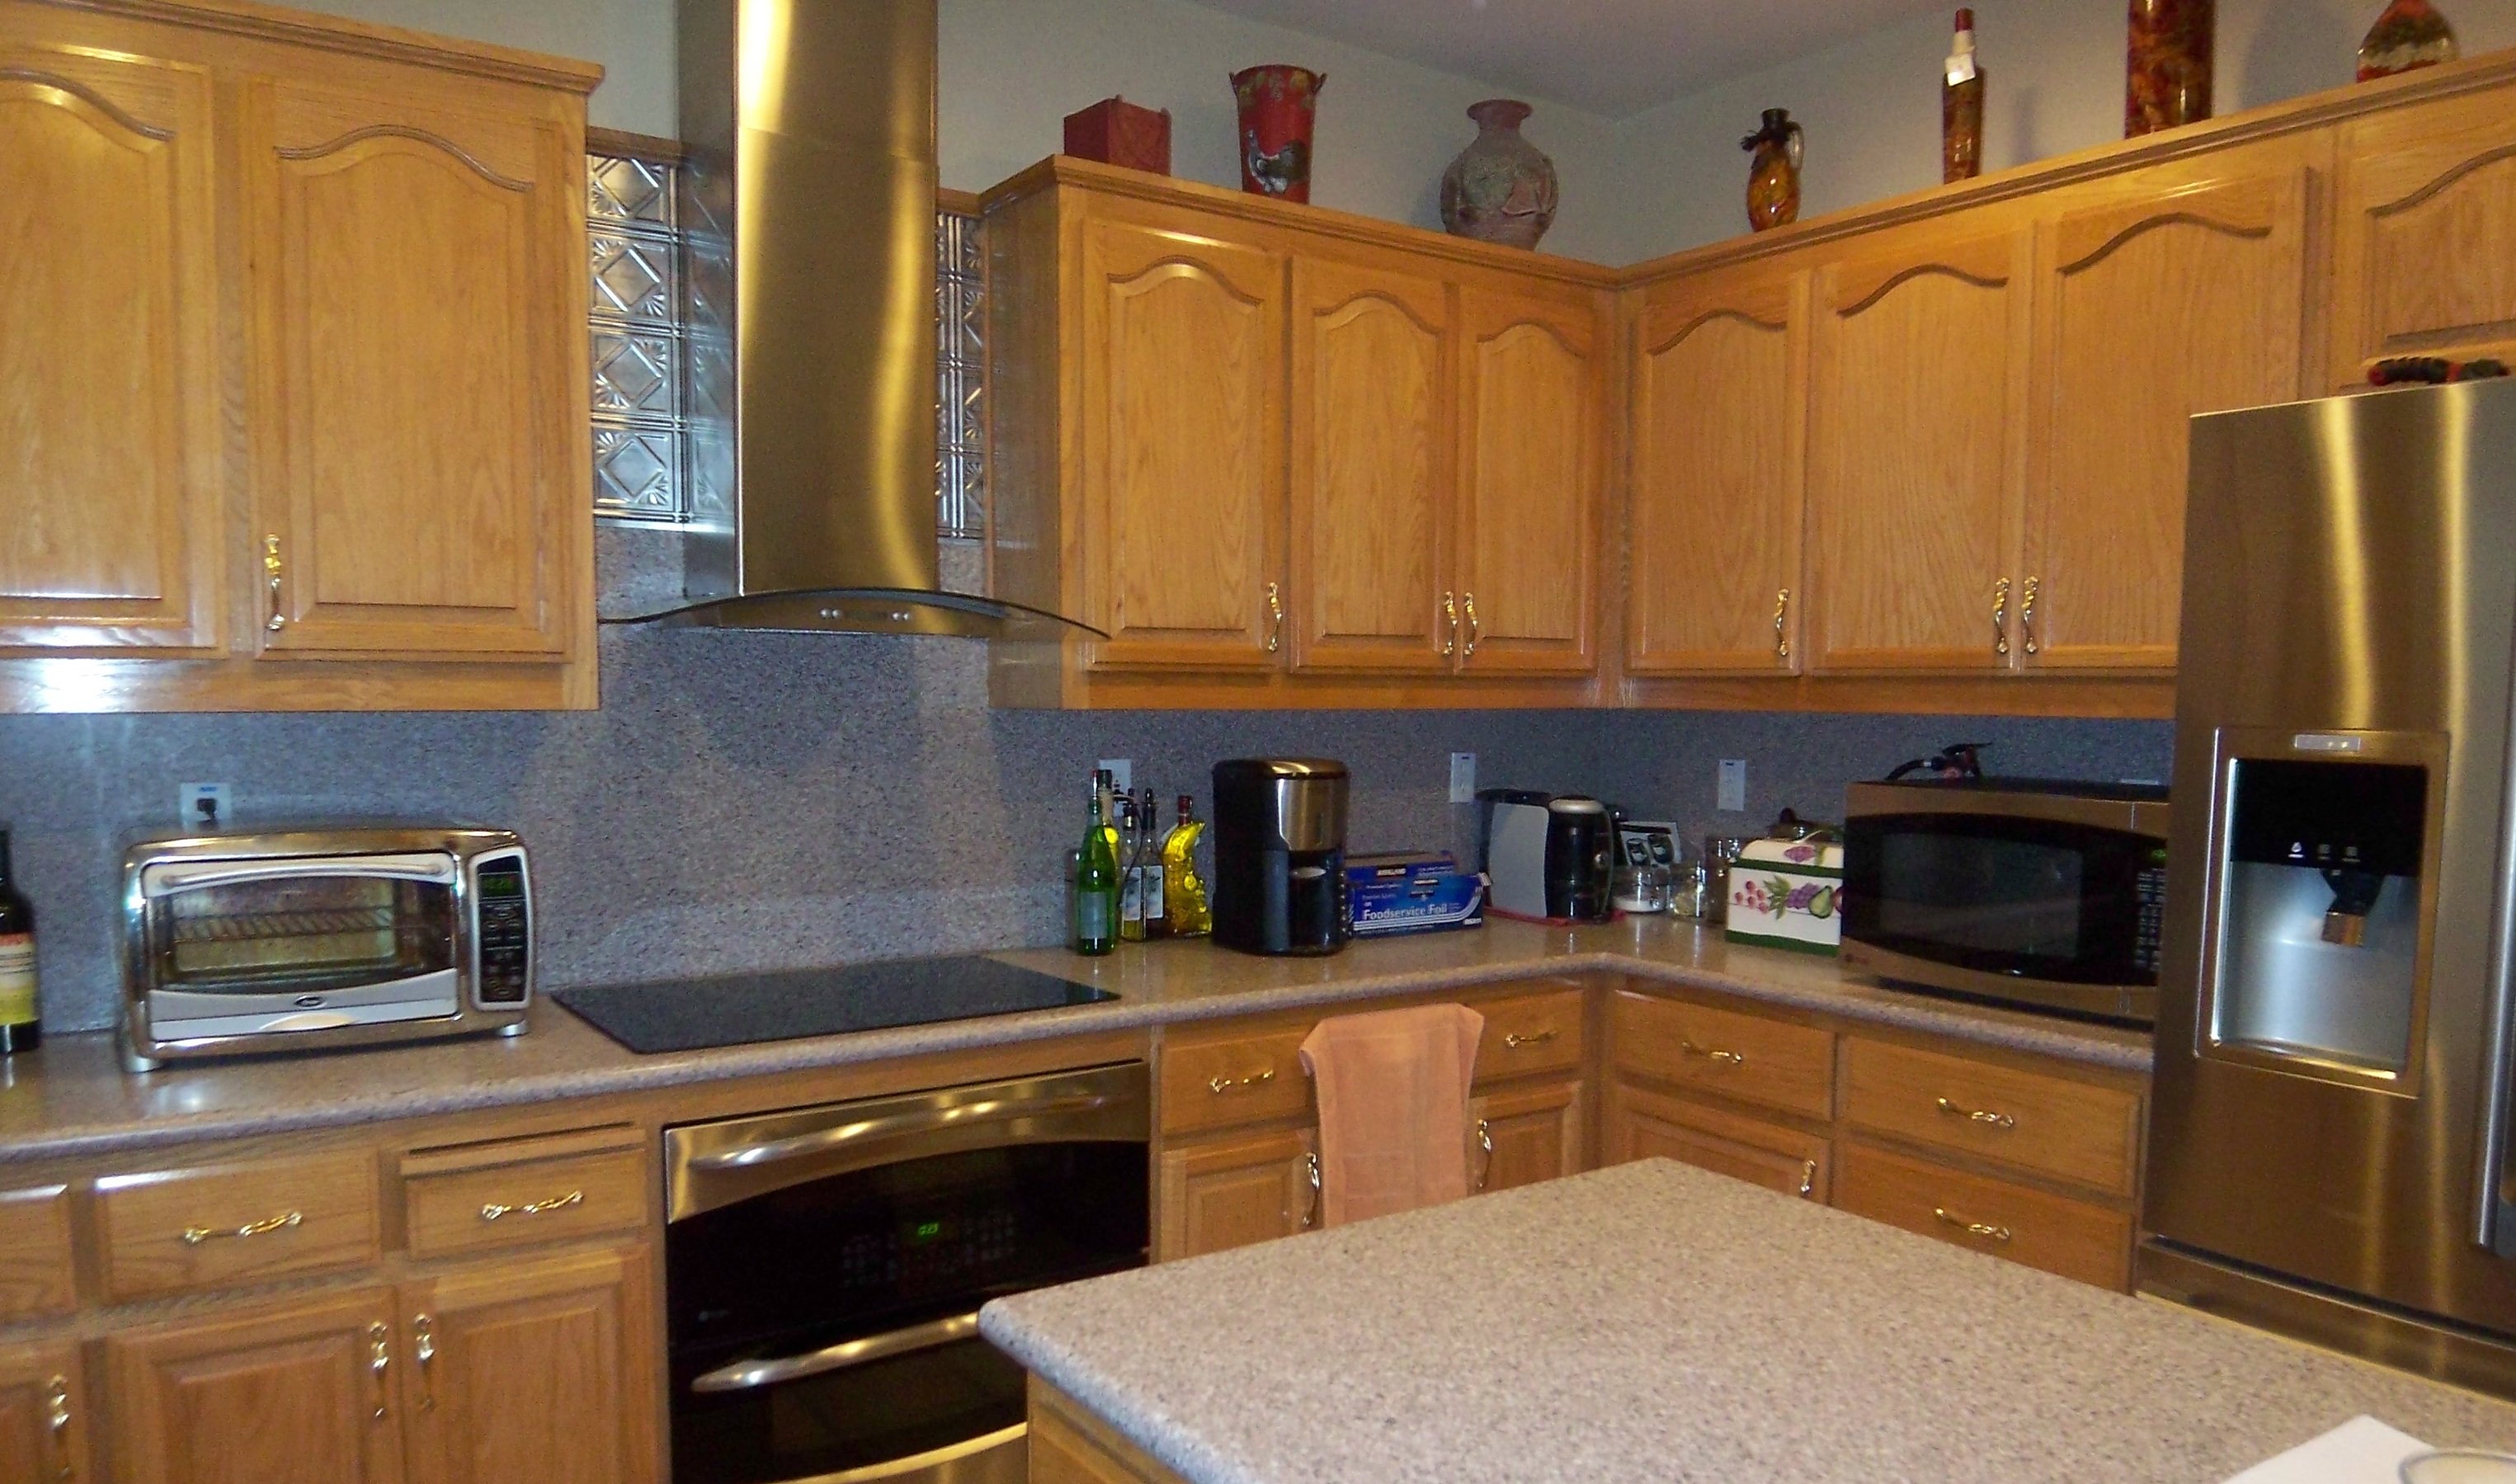 antioch home for sale with gourmet kitchen